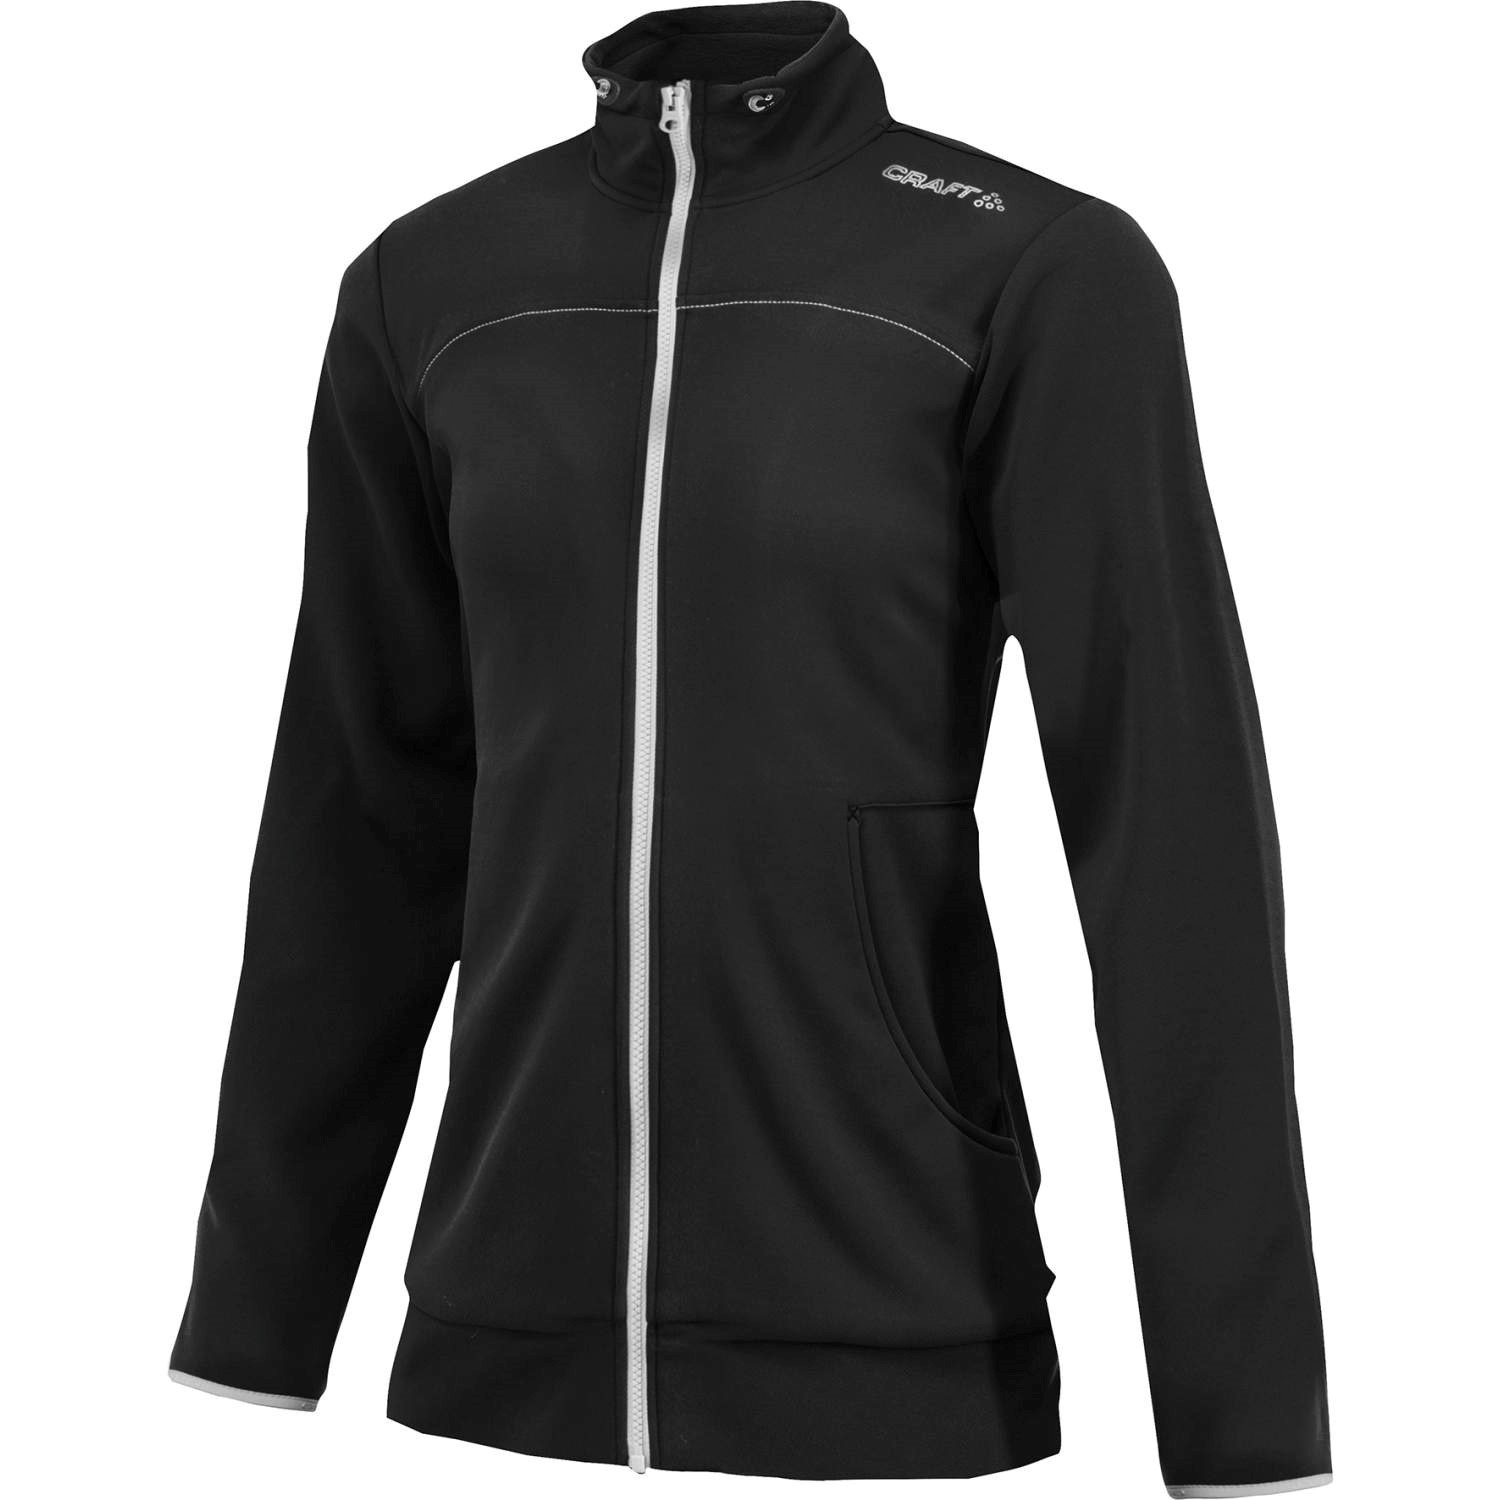 Craft Leisure Jacket Women - Athletic apparel - Sport - Timarco.co.uk